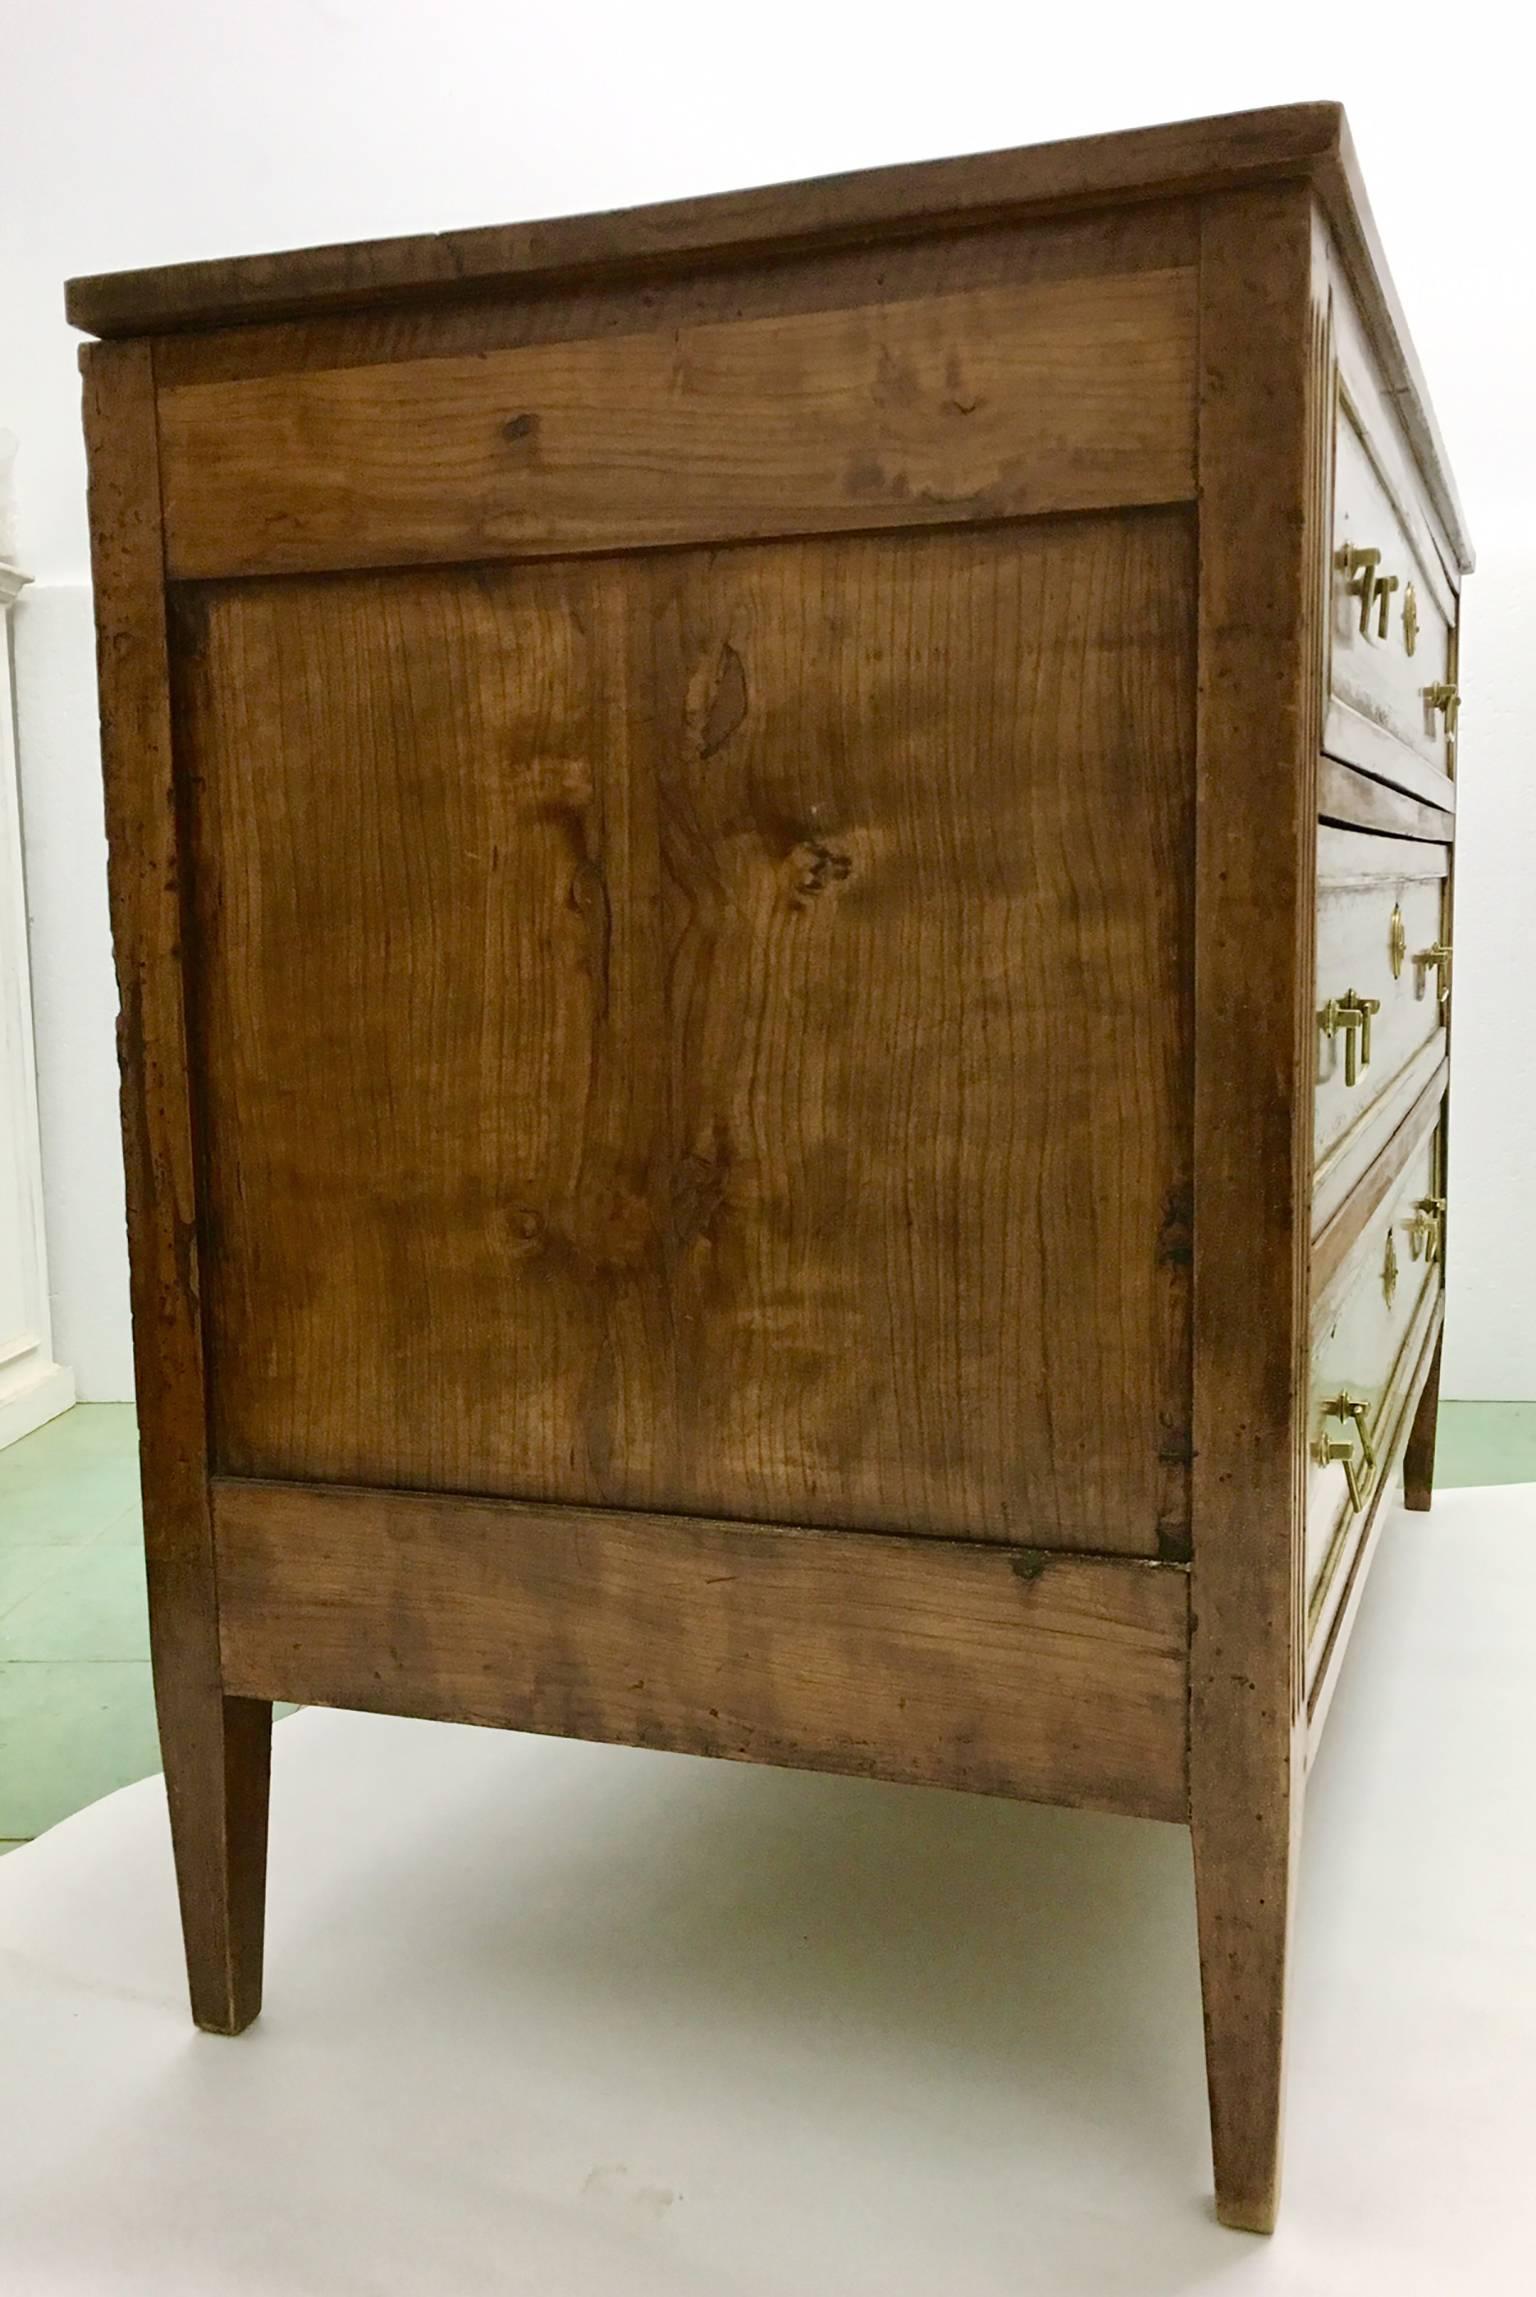 Luois XVI period marquetry French commode with three drawers and beautiful patina, walnut wood, the interior of the three drawers is oak.
The work of marquetry is in walnut, with some parts dyed in green, bronze knobs and handles.